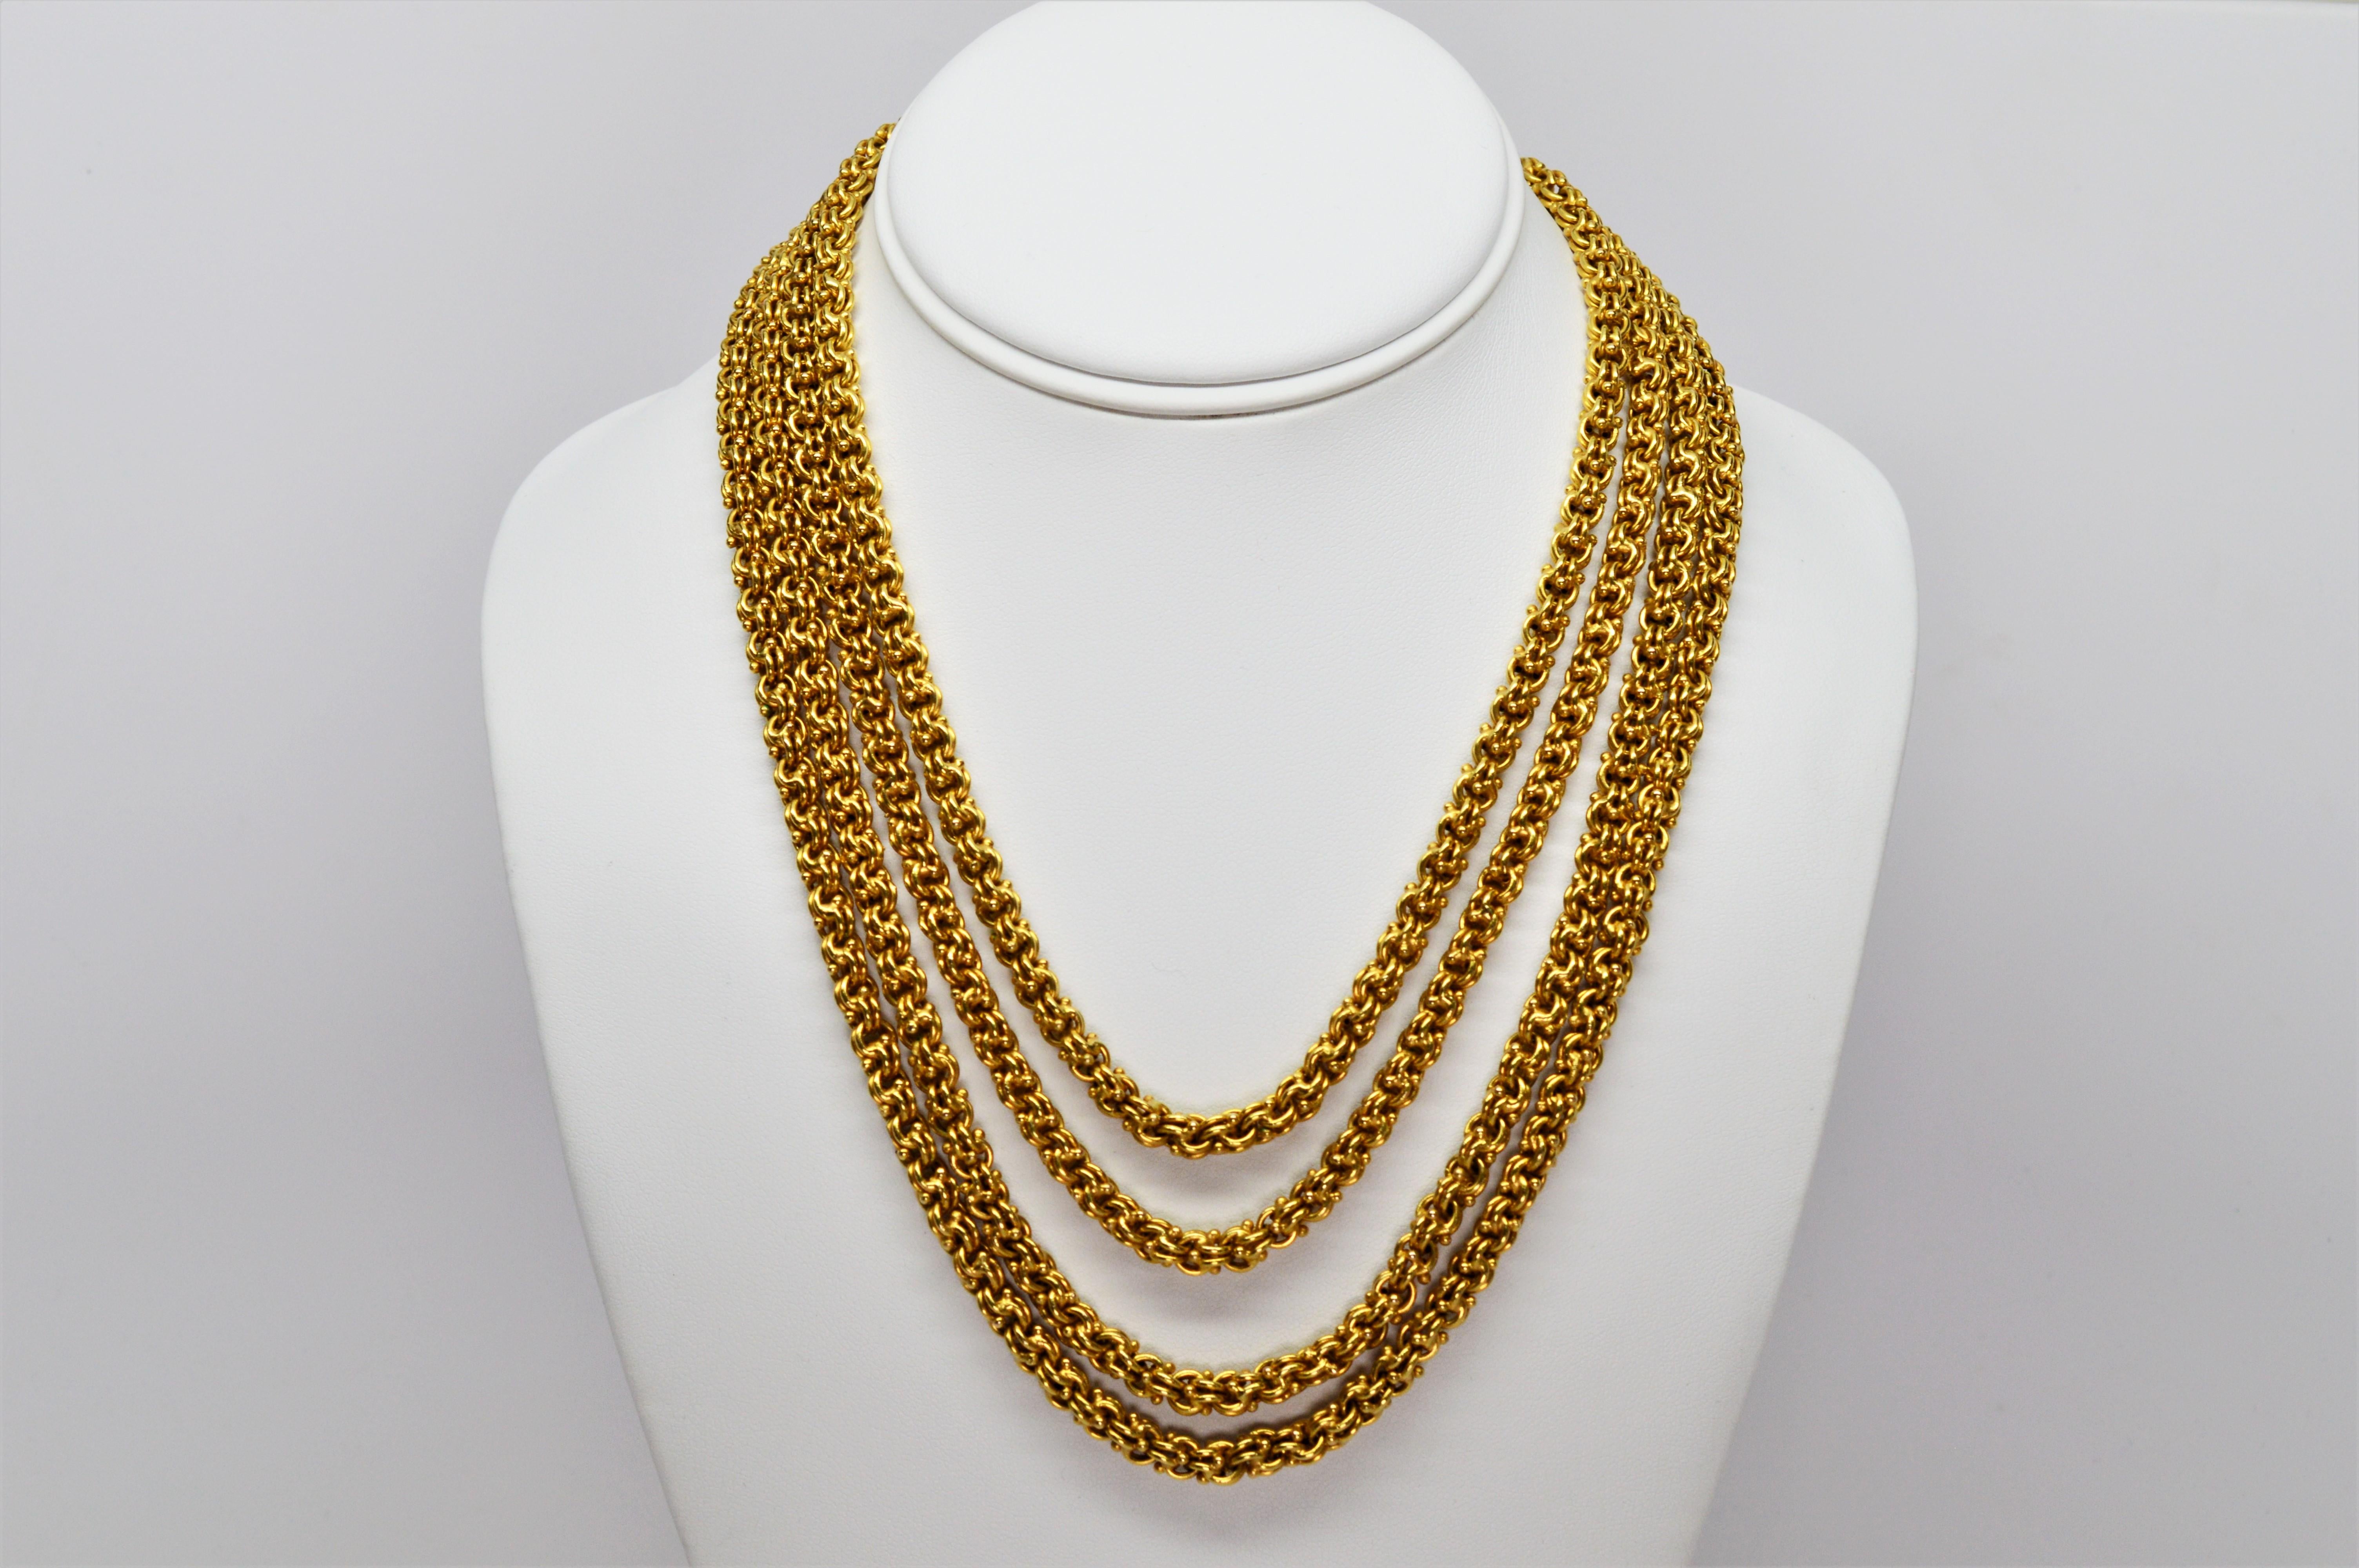 Truly extraordinary describes the remarkable yards of fourteen karat 14K yellow gold that creates this antique double cable chain necklace.
Measuring seventy eight (78) inches long, this continuous length of handmade chain, at 5.3 mm in heft, is